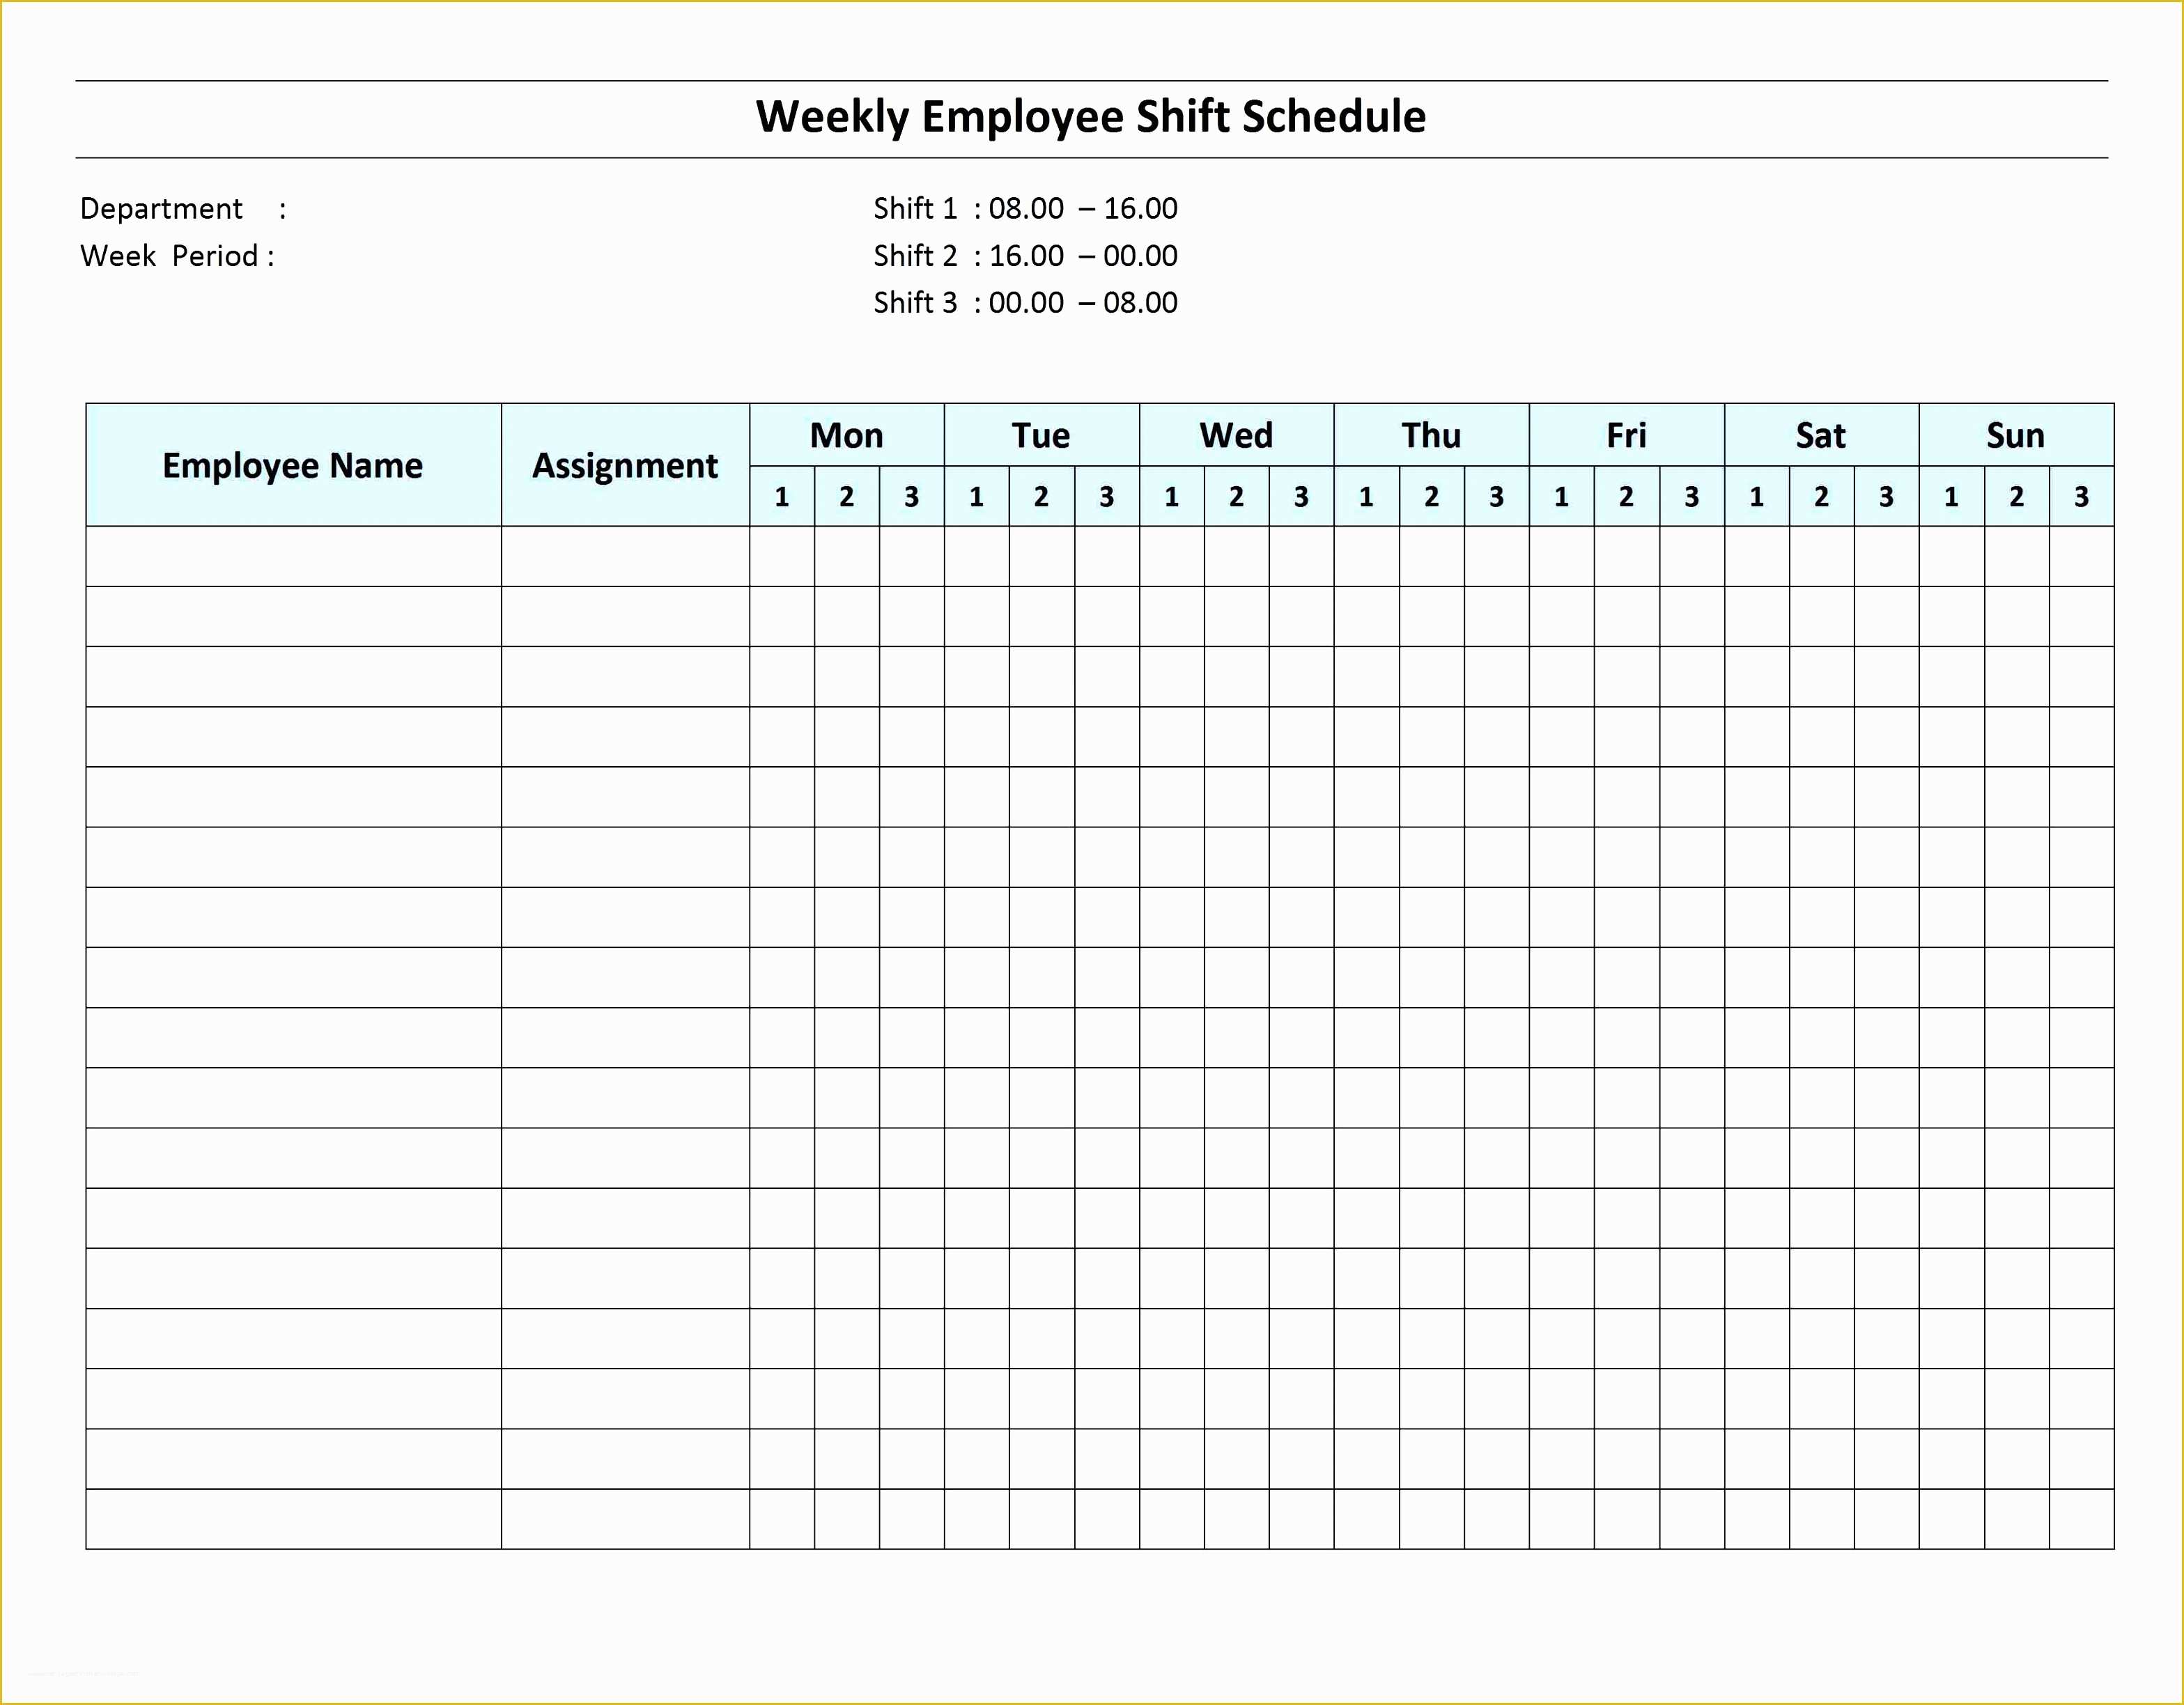 Monthly Shift Schedule Template Excel Free Of 6 Excel Daily Work Schedule Sampletemplatess